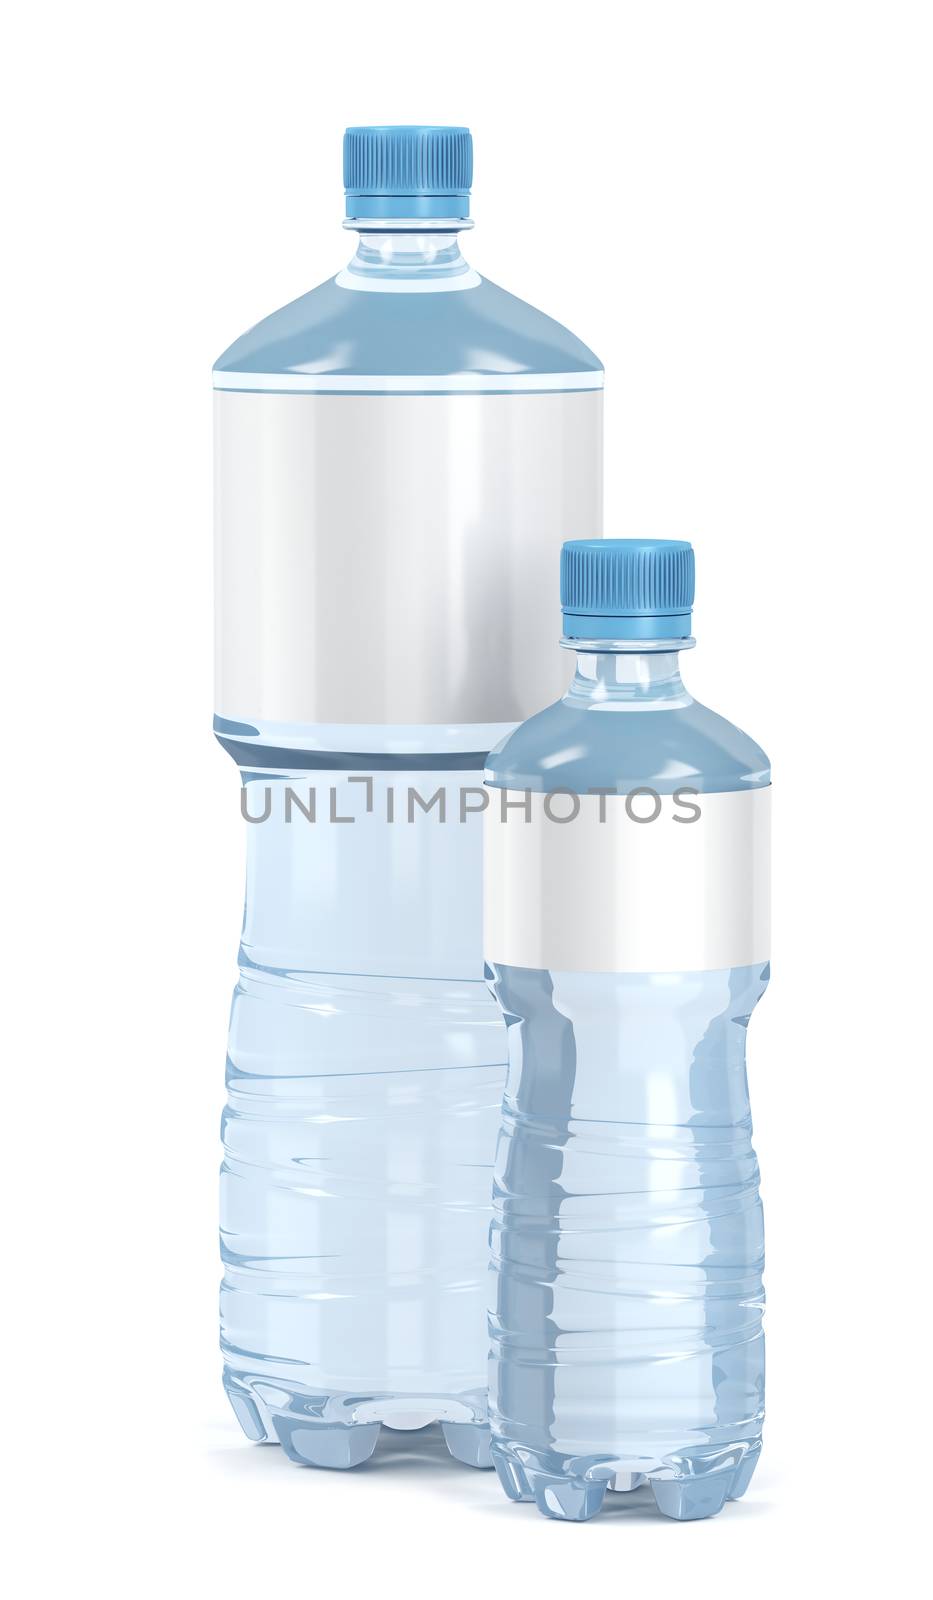 Small and big water bottles on white by magraphics